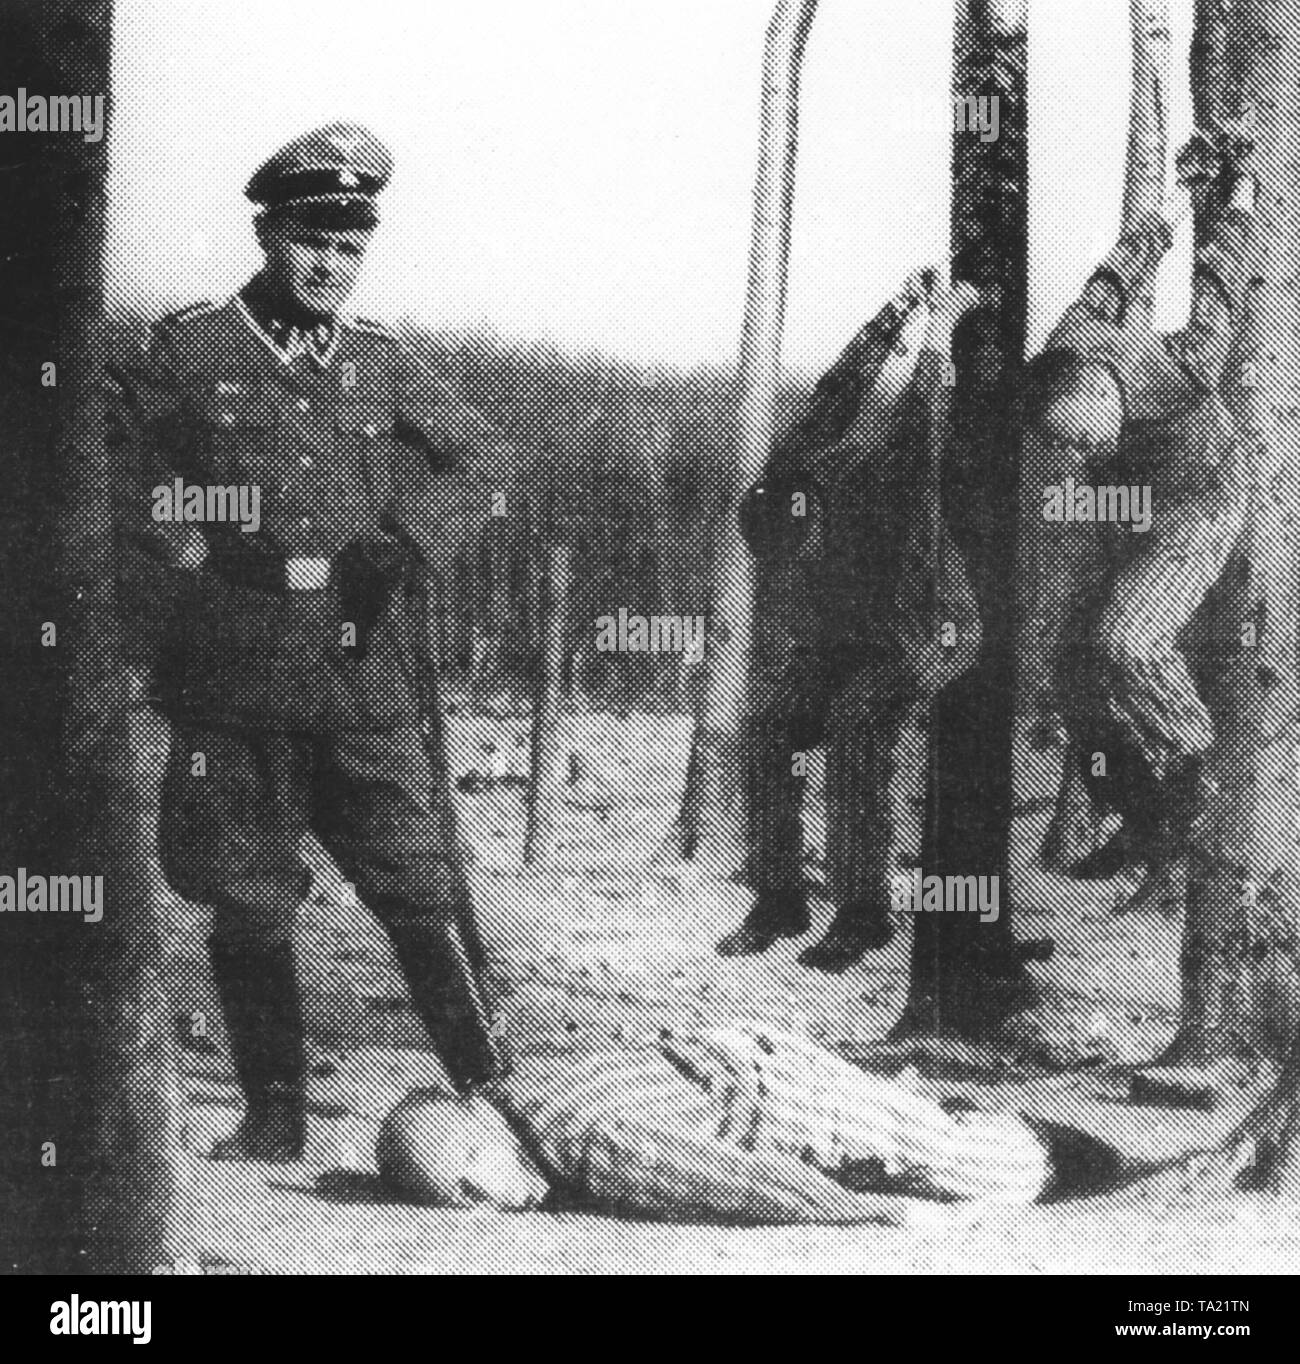 SS soldier poses next to prisoners who are subjected to the punishment of the tree hanging. The image is a mock recording, possibly provided by the DEFA for political reasons in 1958. See: Herbert Obenaus, The photo of tree-hanging - a picture goes around the world in: Memorials-Newsletter 68 (Okt.1995), pp 3-8. The image is inverted. Stock Photo